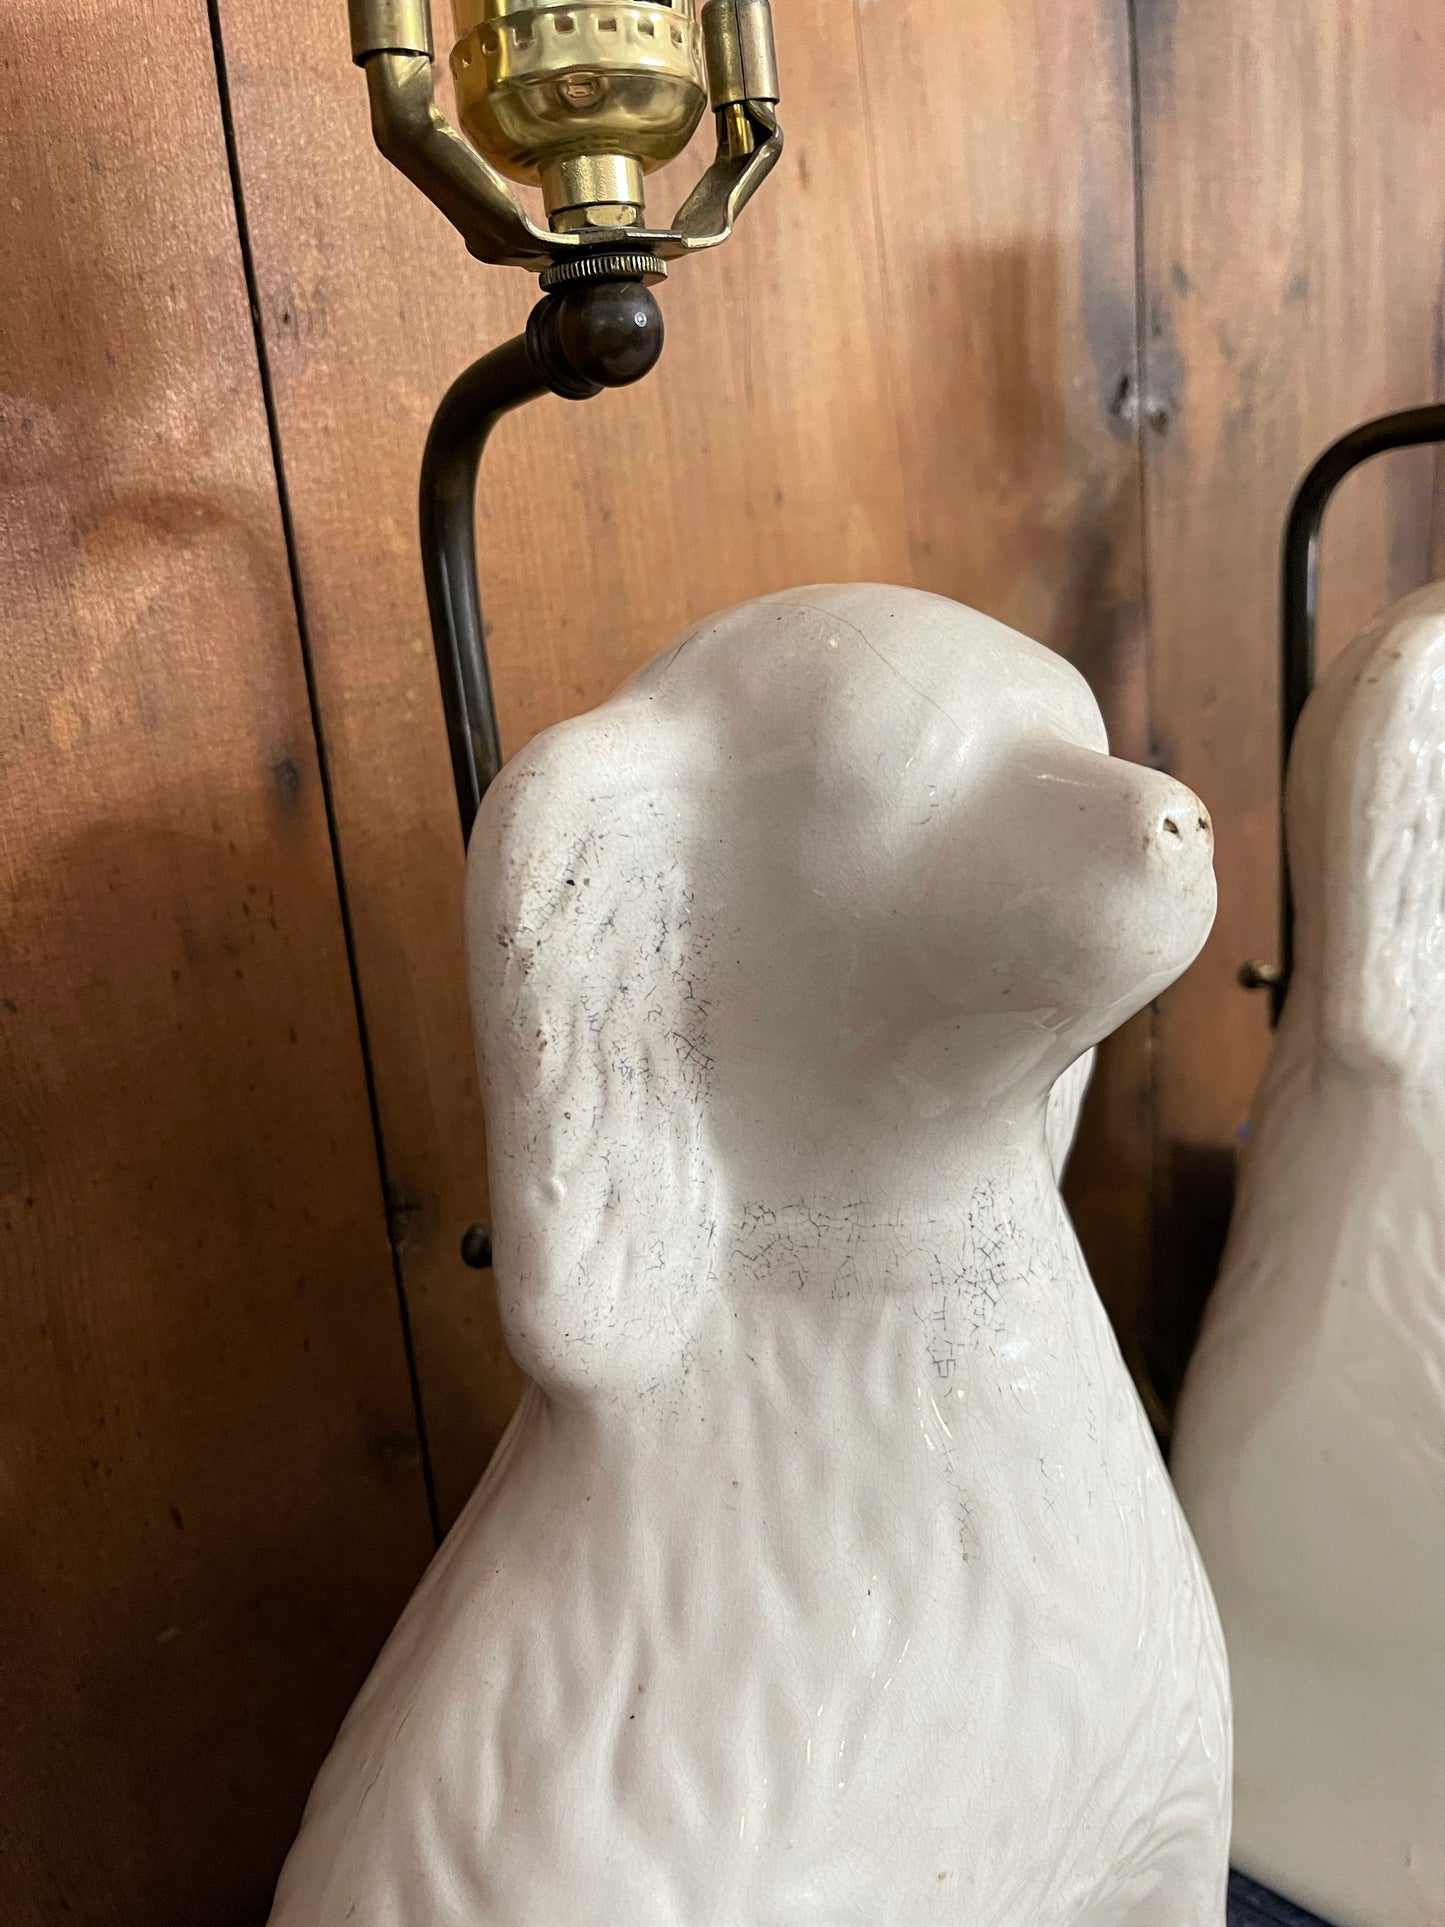 Pair of Staffordshire Spaniel Lamps, Antique, Blue and White, Vintage